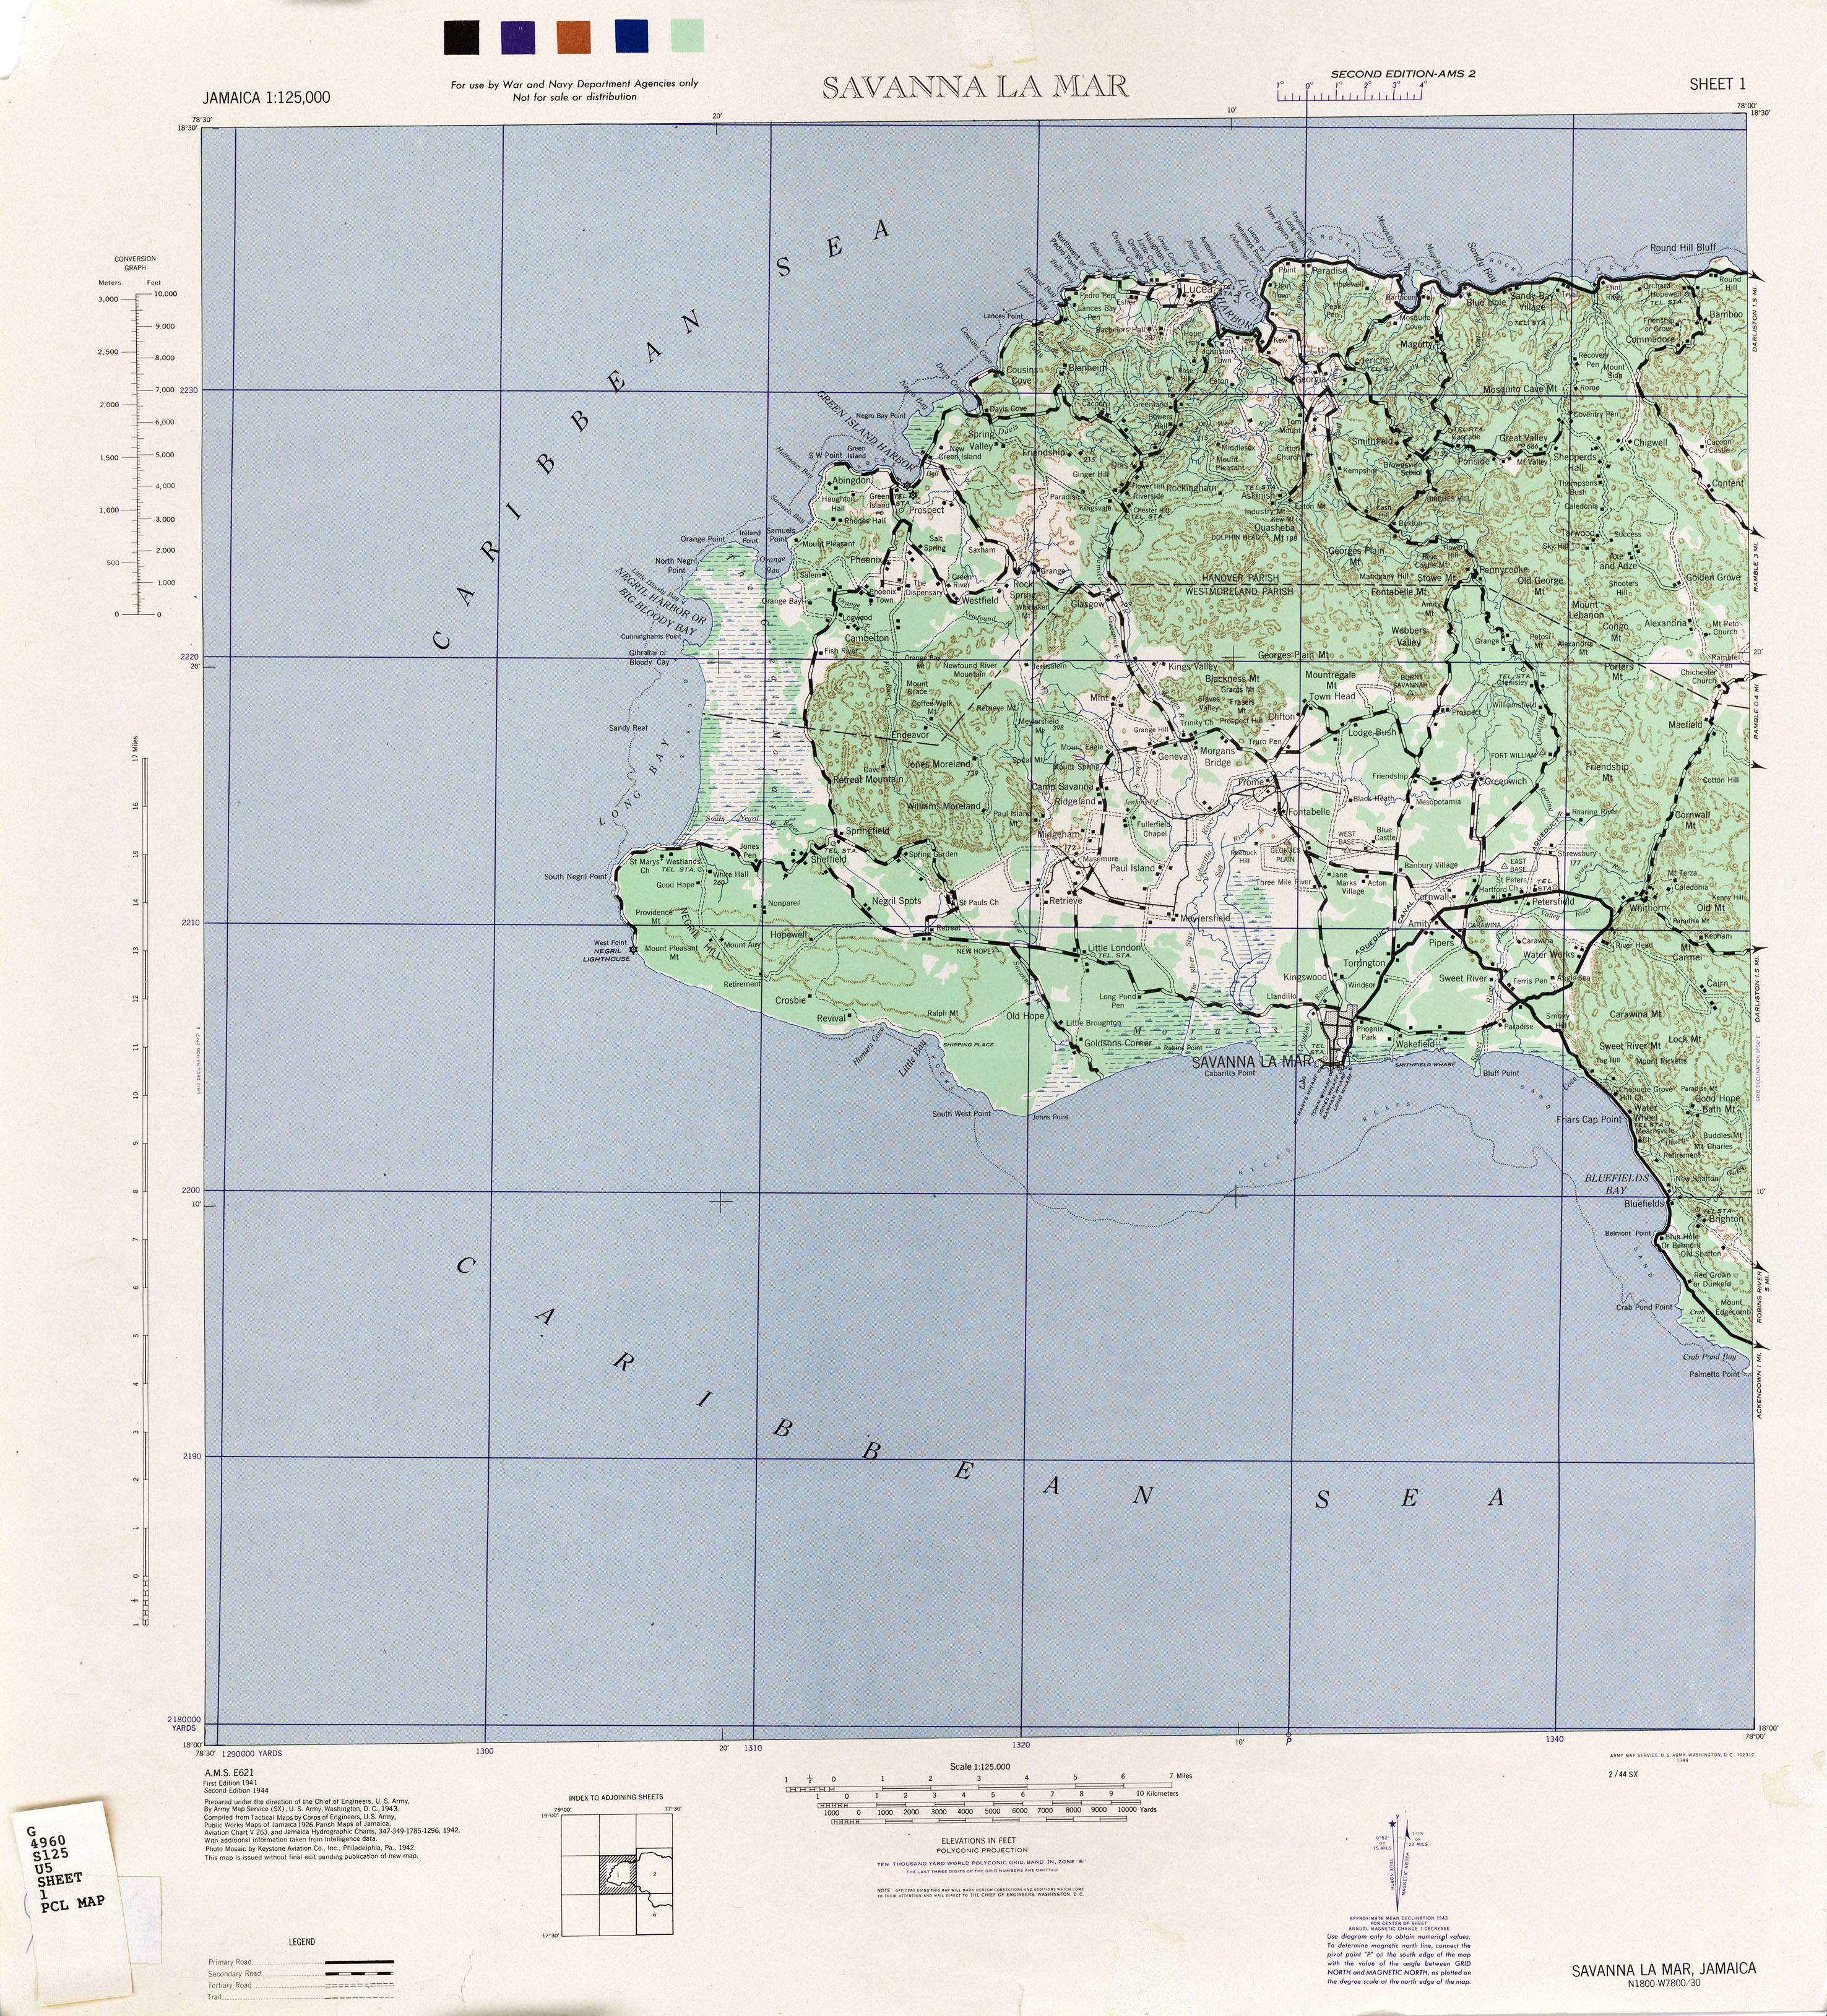 Jamaica AMS Topographic Maps - Perry-Castañeda Map Collection - UT Library Online2952 x 3258